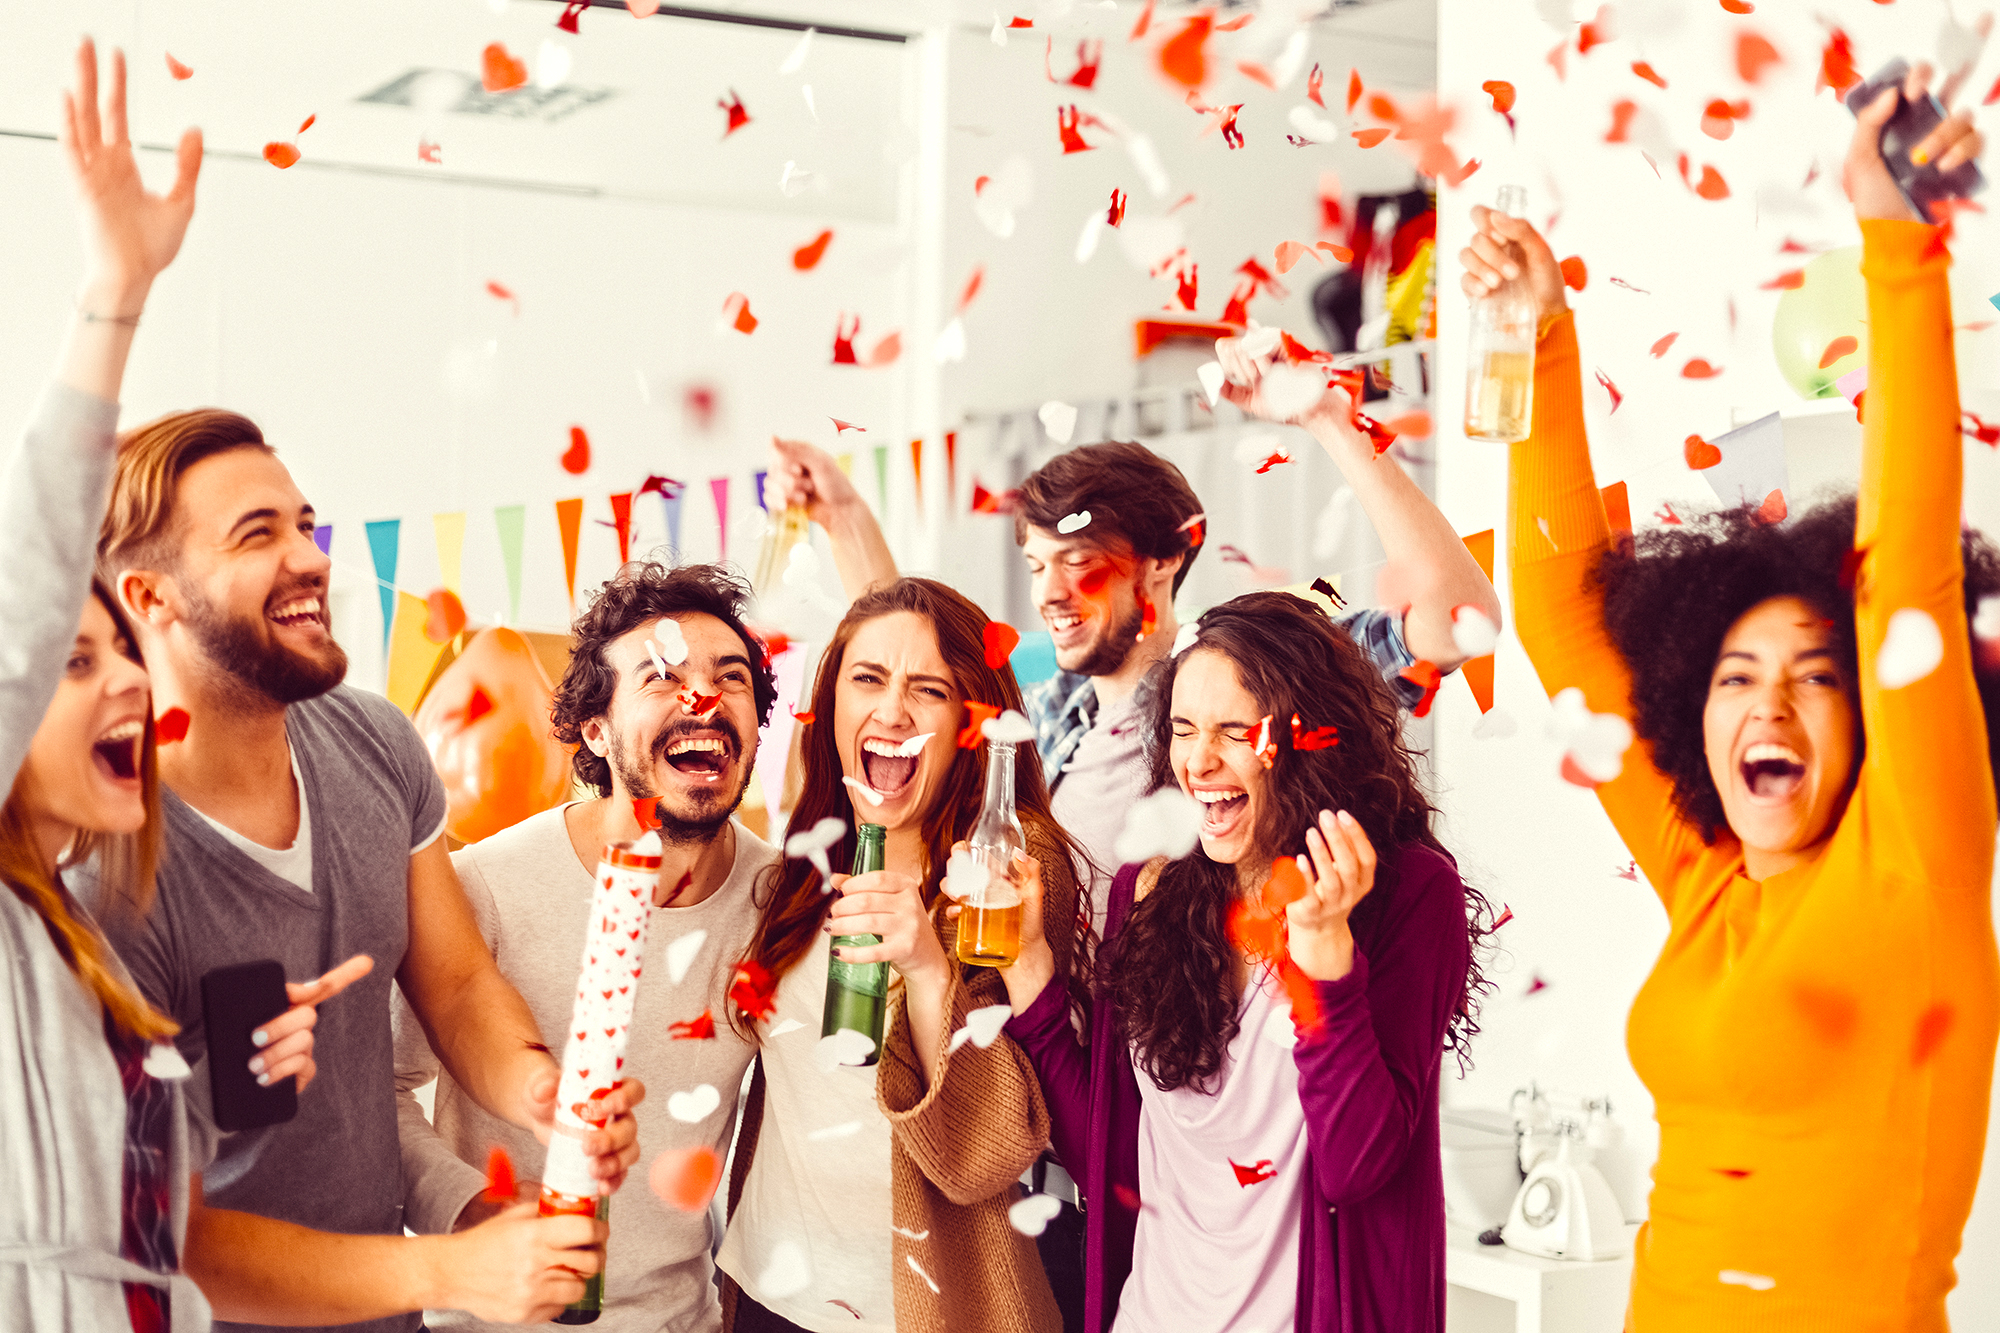 Company holiday parties are back — but with some restraint